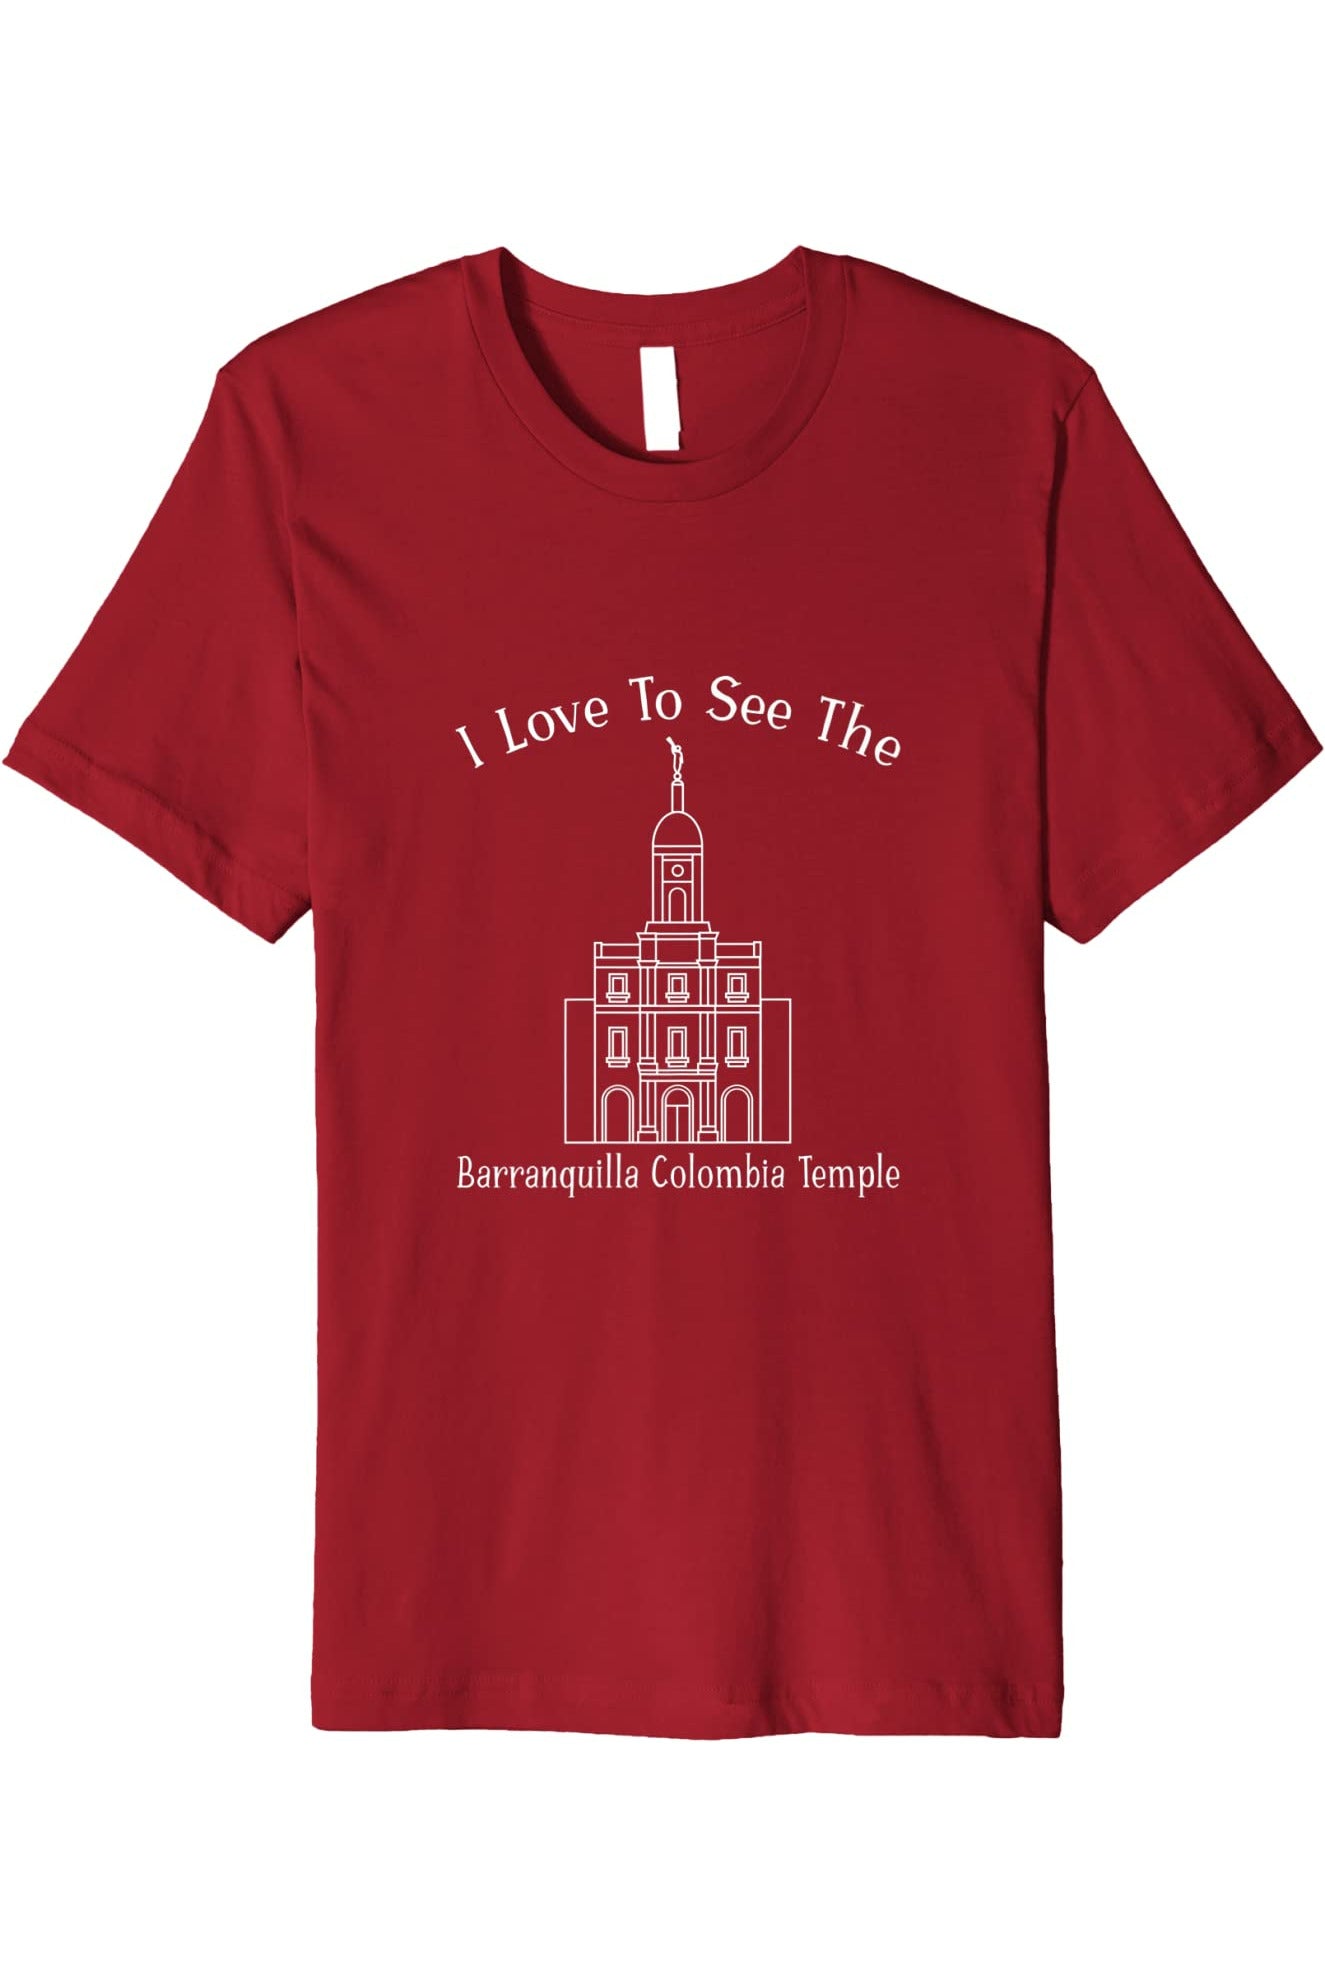 Barranquilla Colombia Temple T-Shirt - Premium - Happy Style (English) US